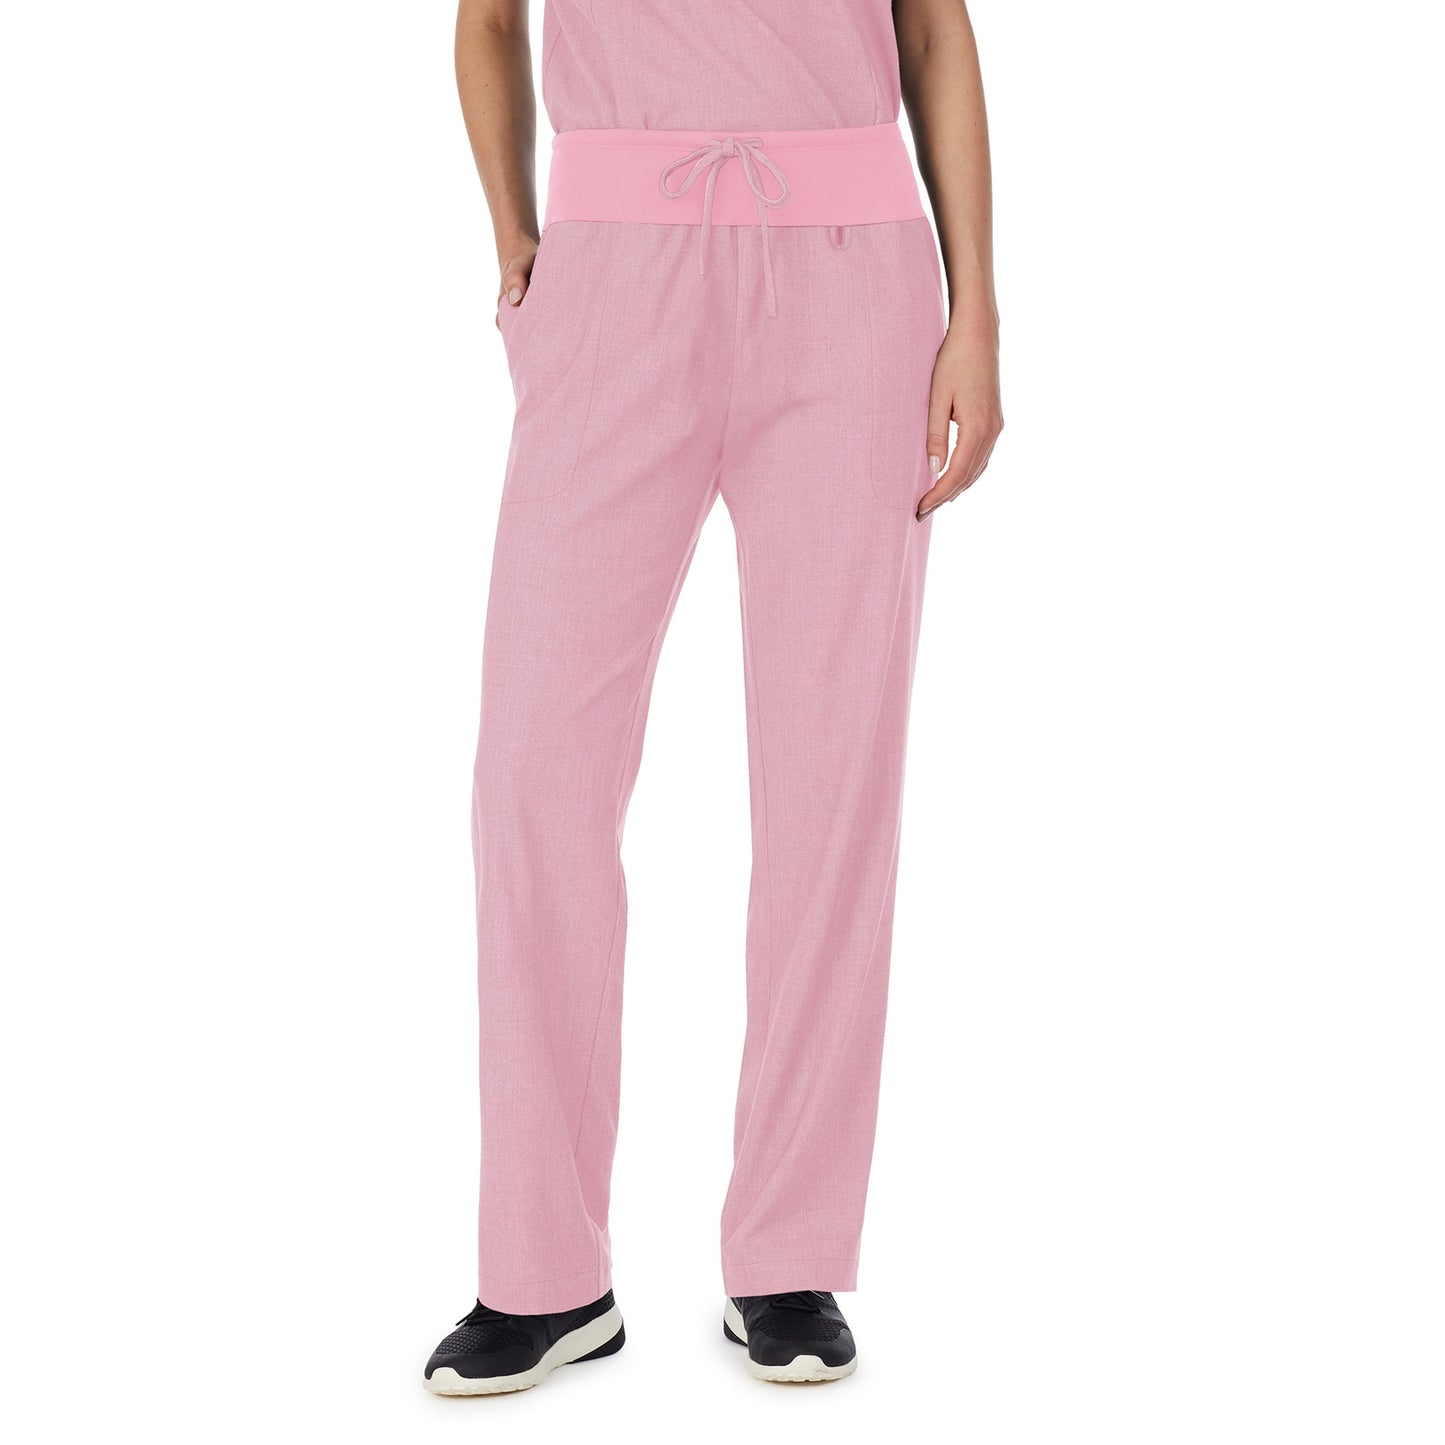 Cameo Pink Heather;Model is wearing size S. She is 5’9”, Bust 32”, Waist 23", Hips 34.5”.@A lady wearing cameo pink heather scrub classic pant.